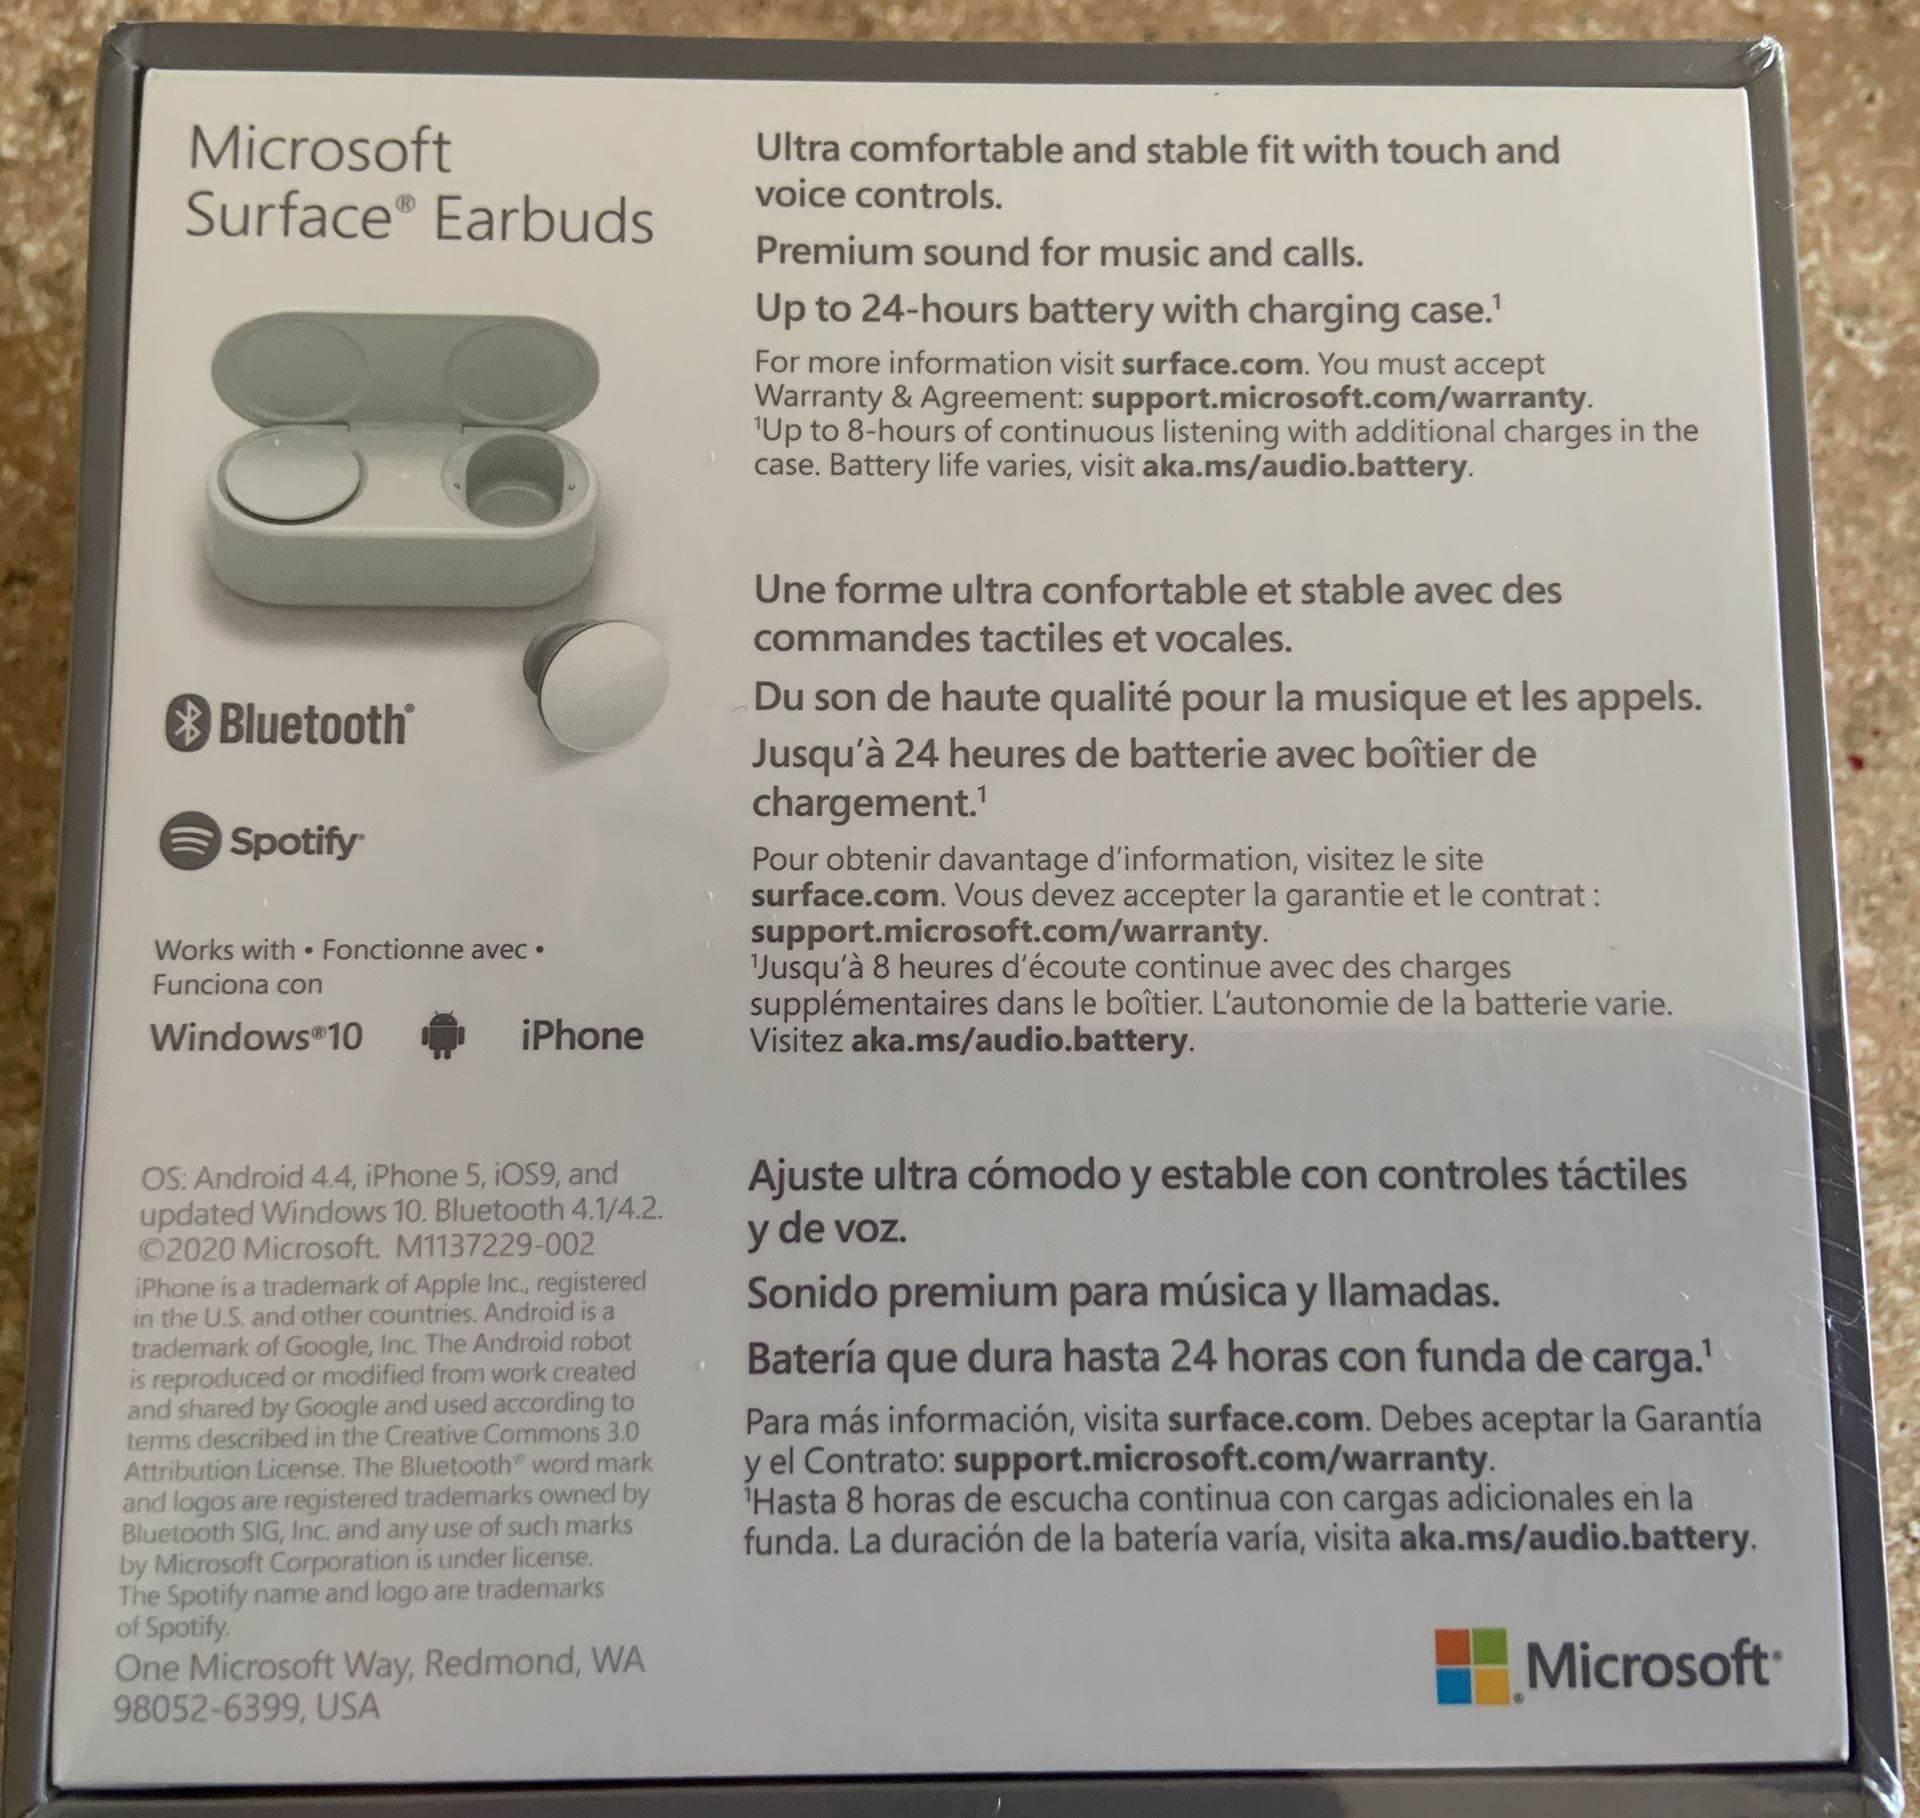 Microsoft surface earbuds